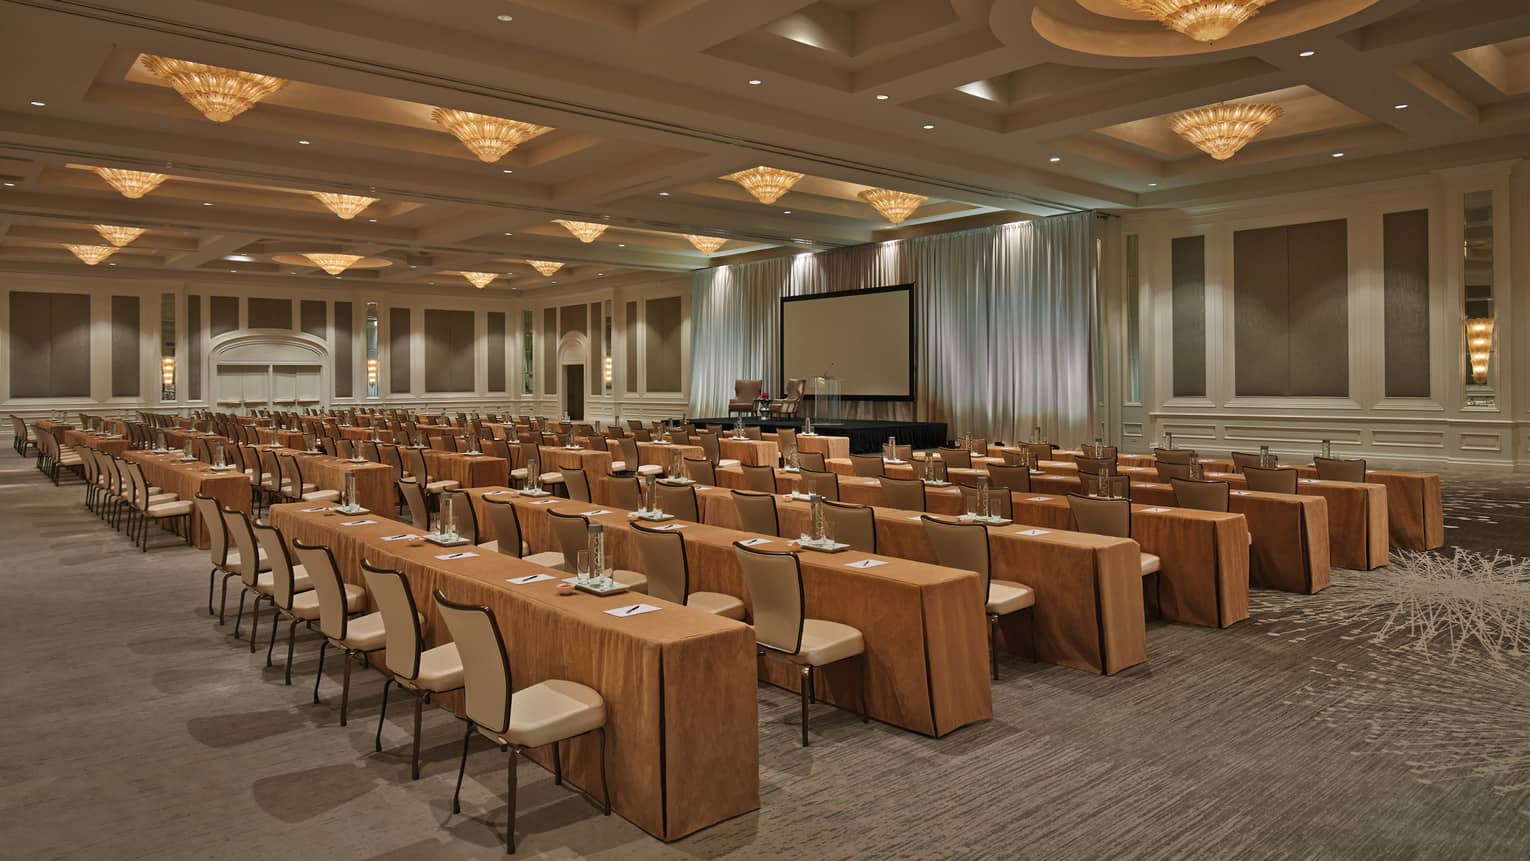 Conference with rows of meeting tables, chairs under cone-shaped lights in large ballroom